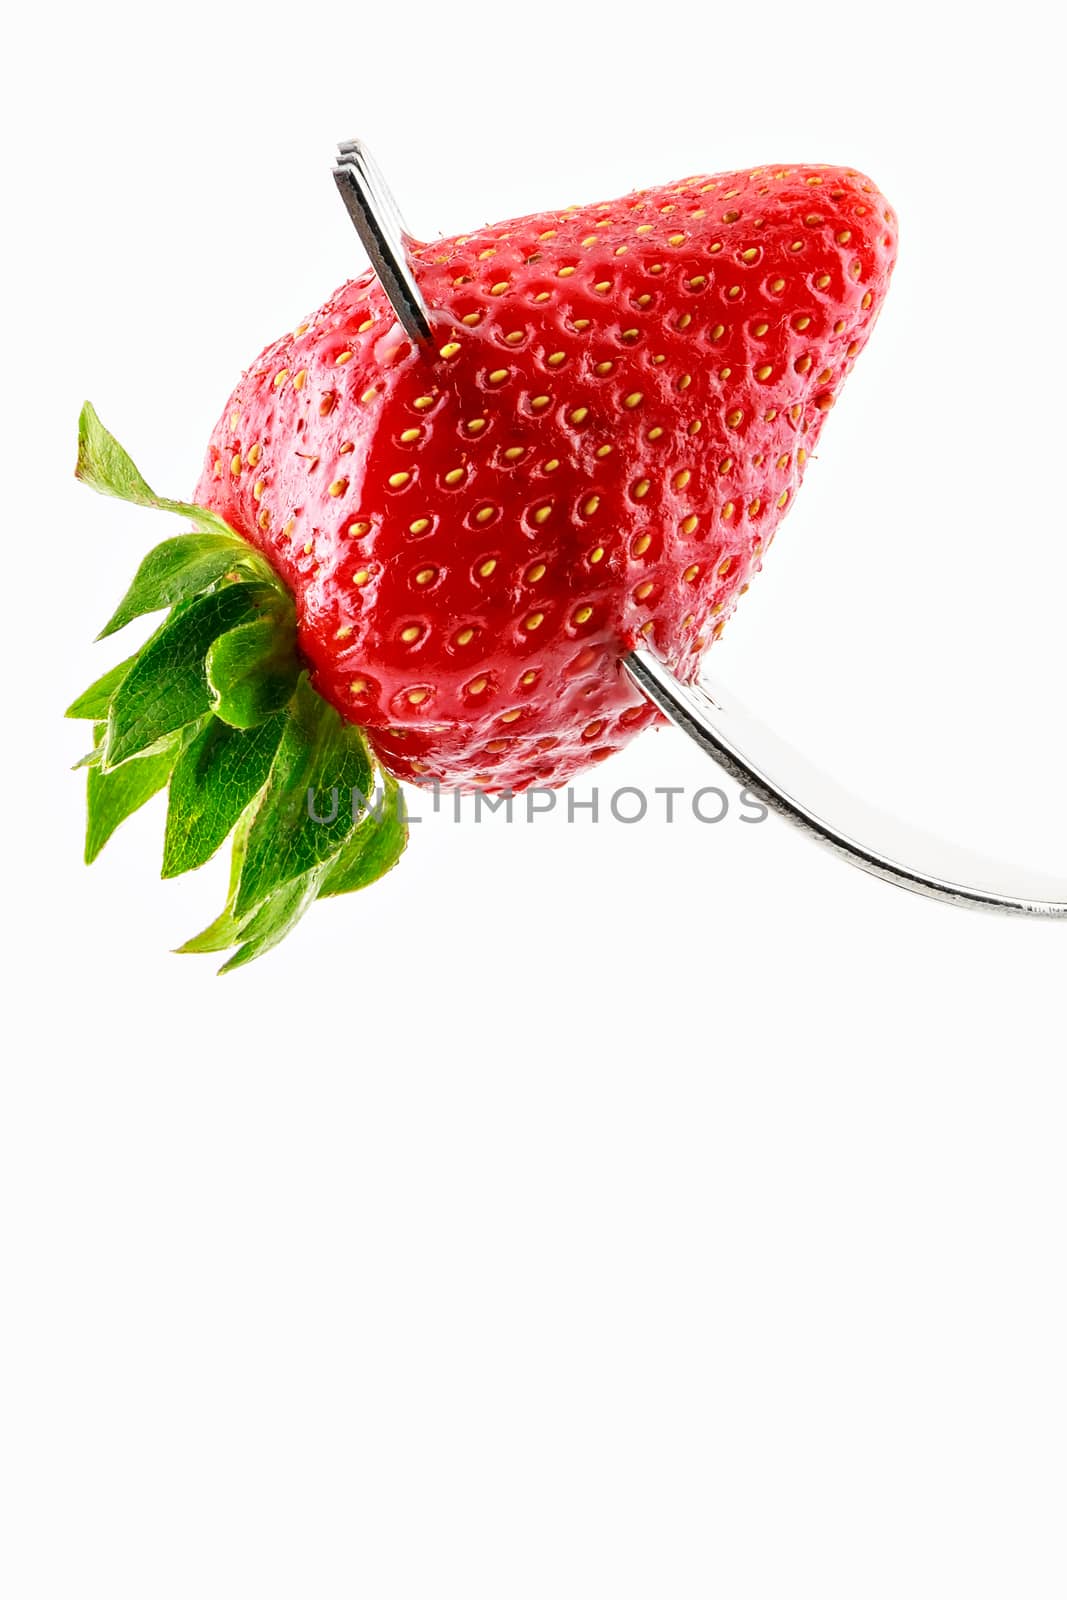 Strawberry on fork on a white background.Vertical image